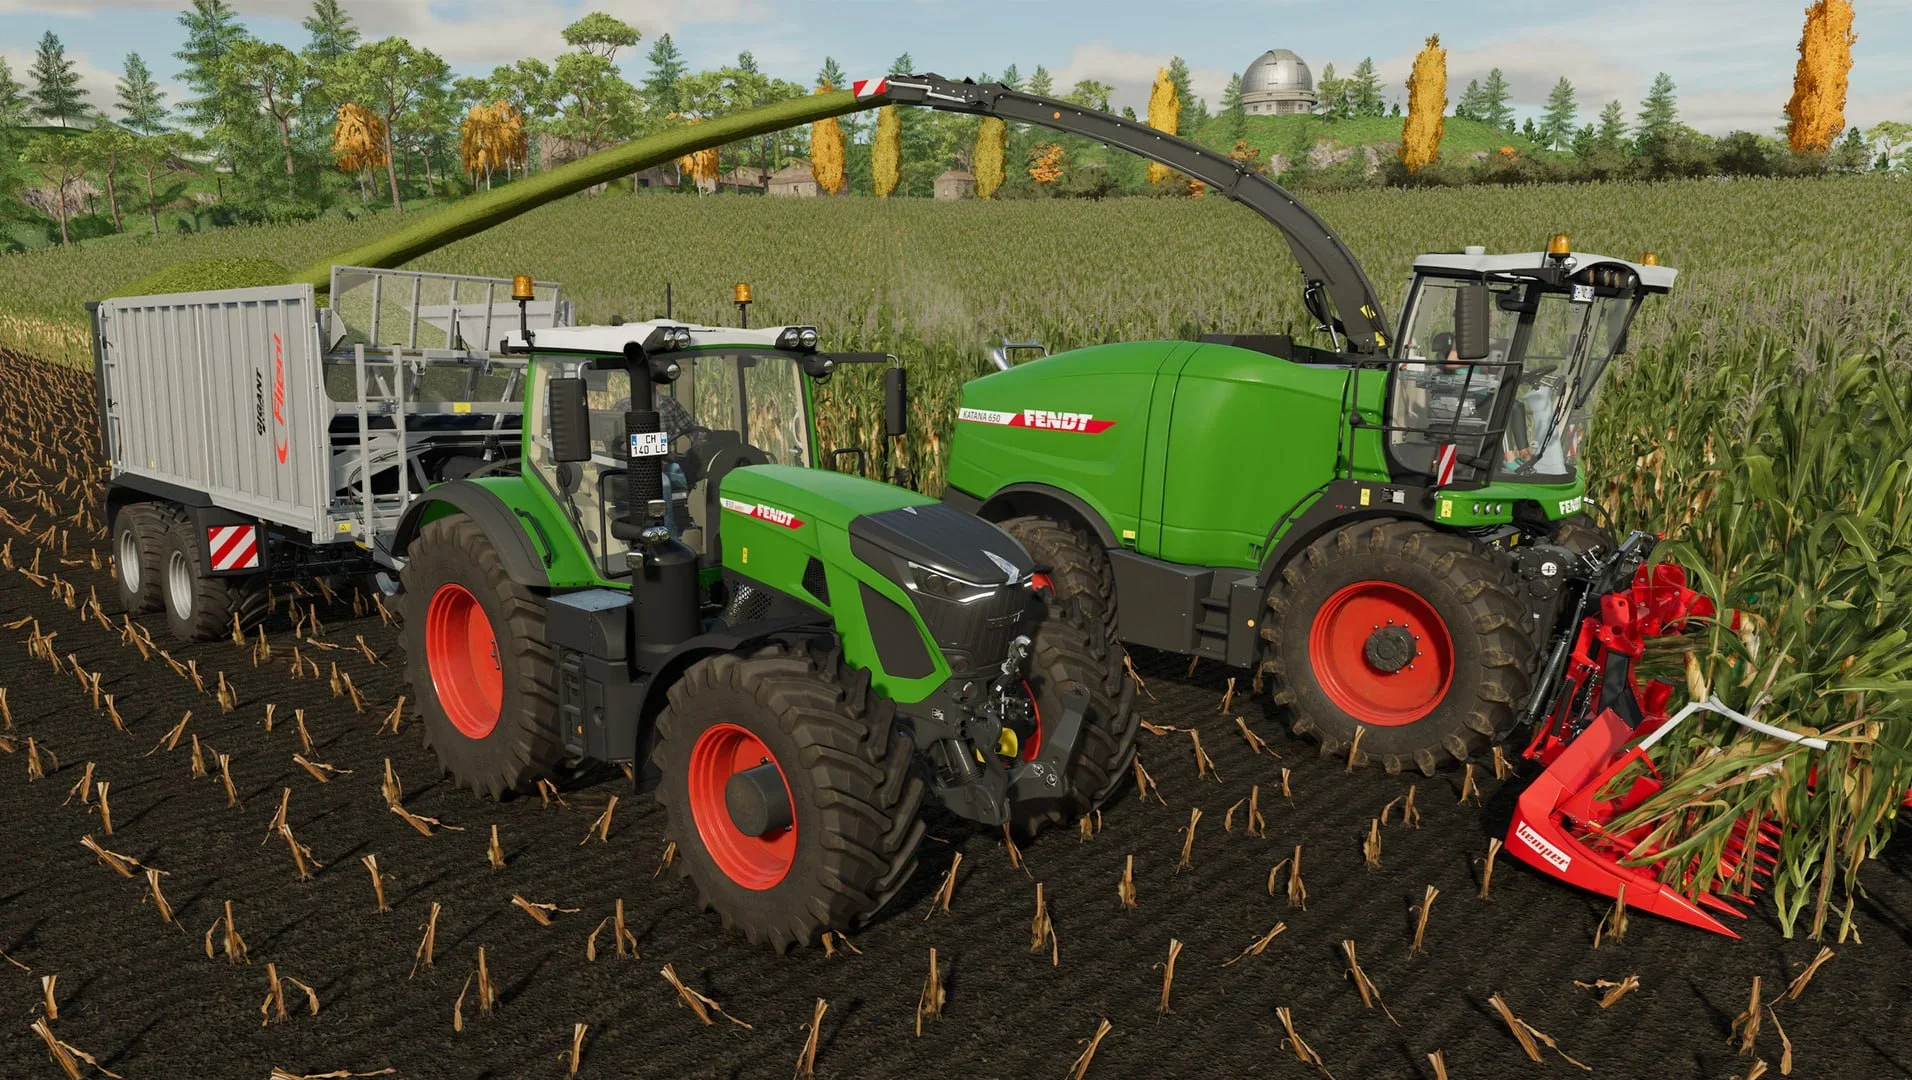 Epic Games Store has started giving away Farming Simulator 22 for free